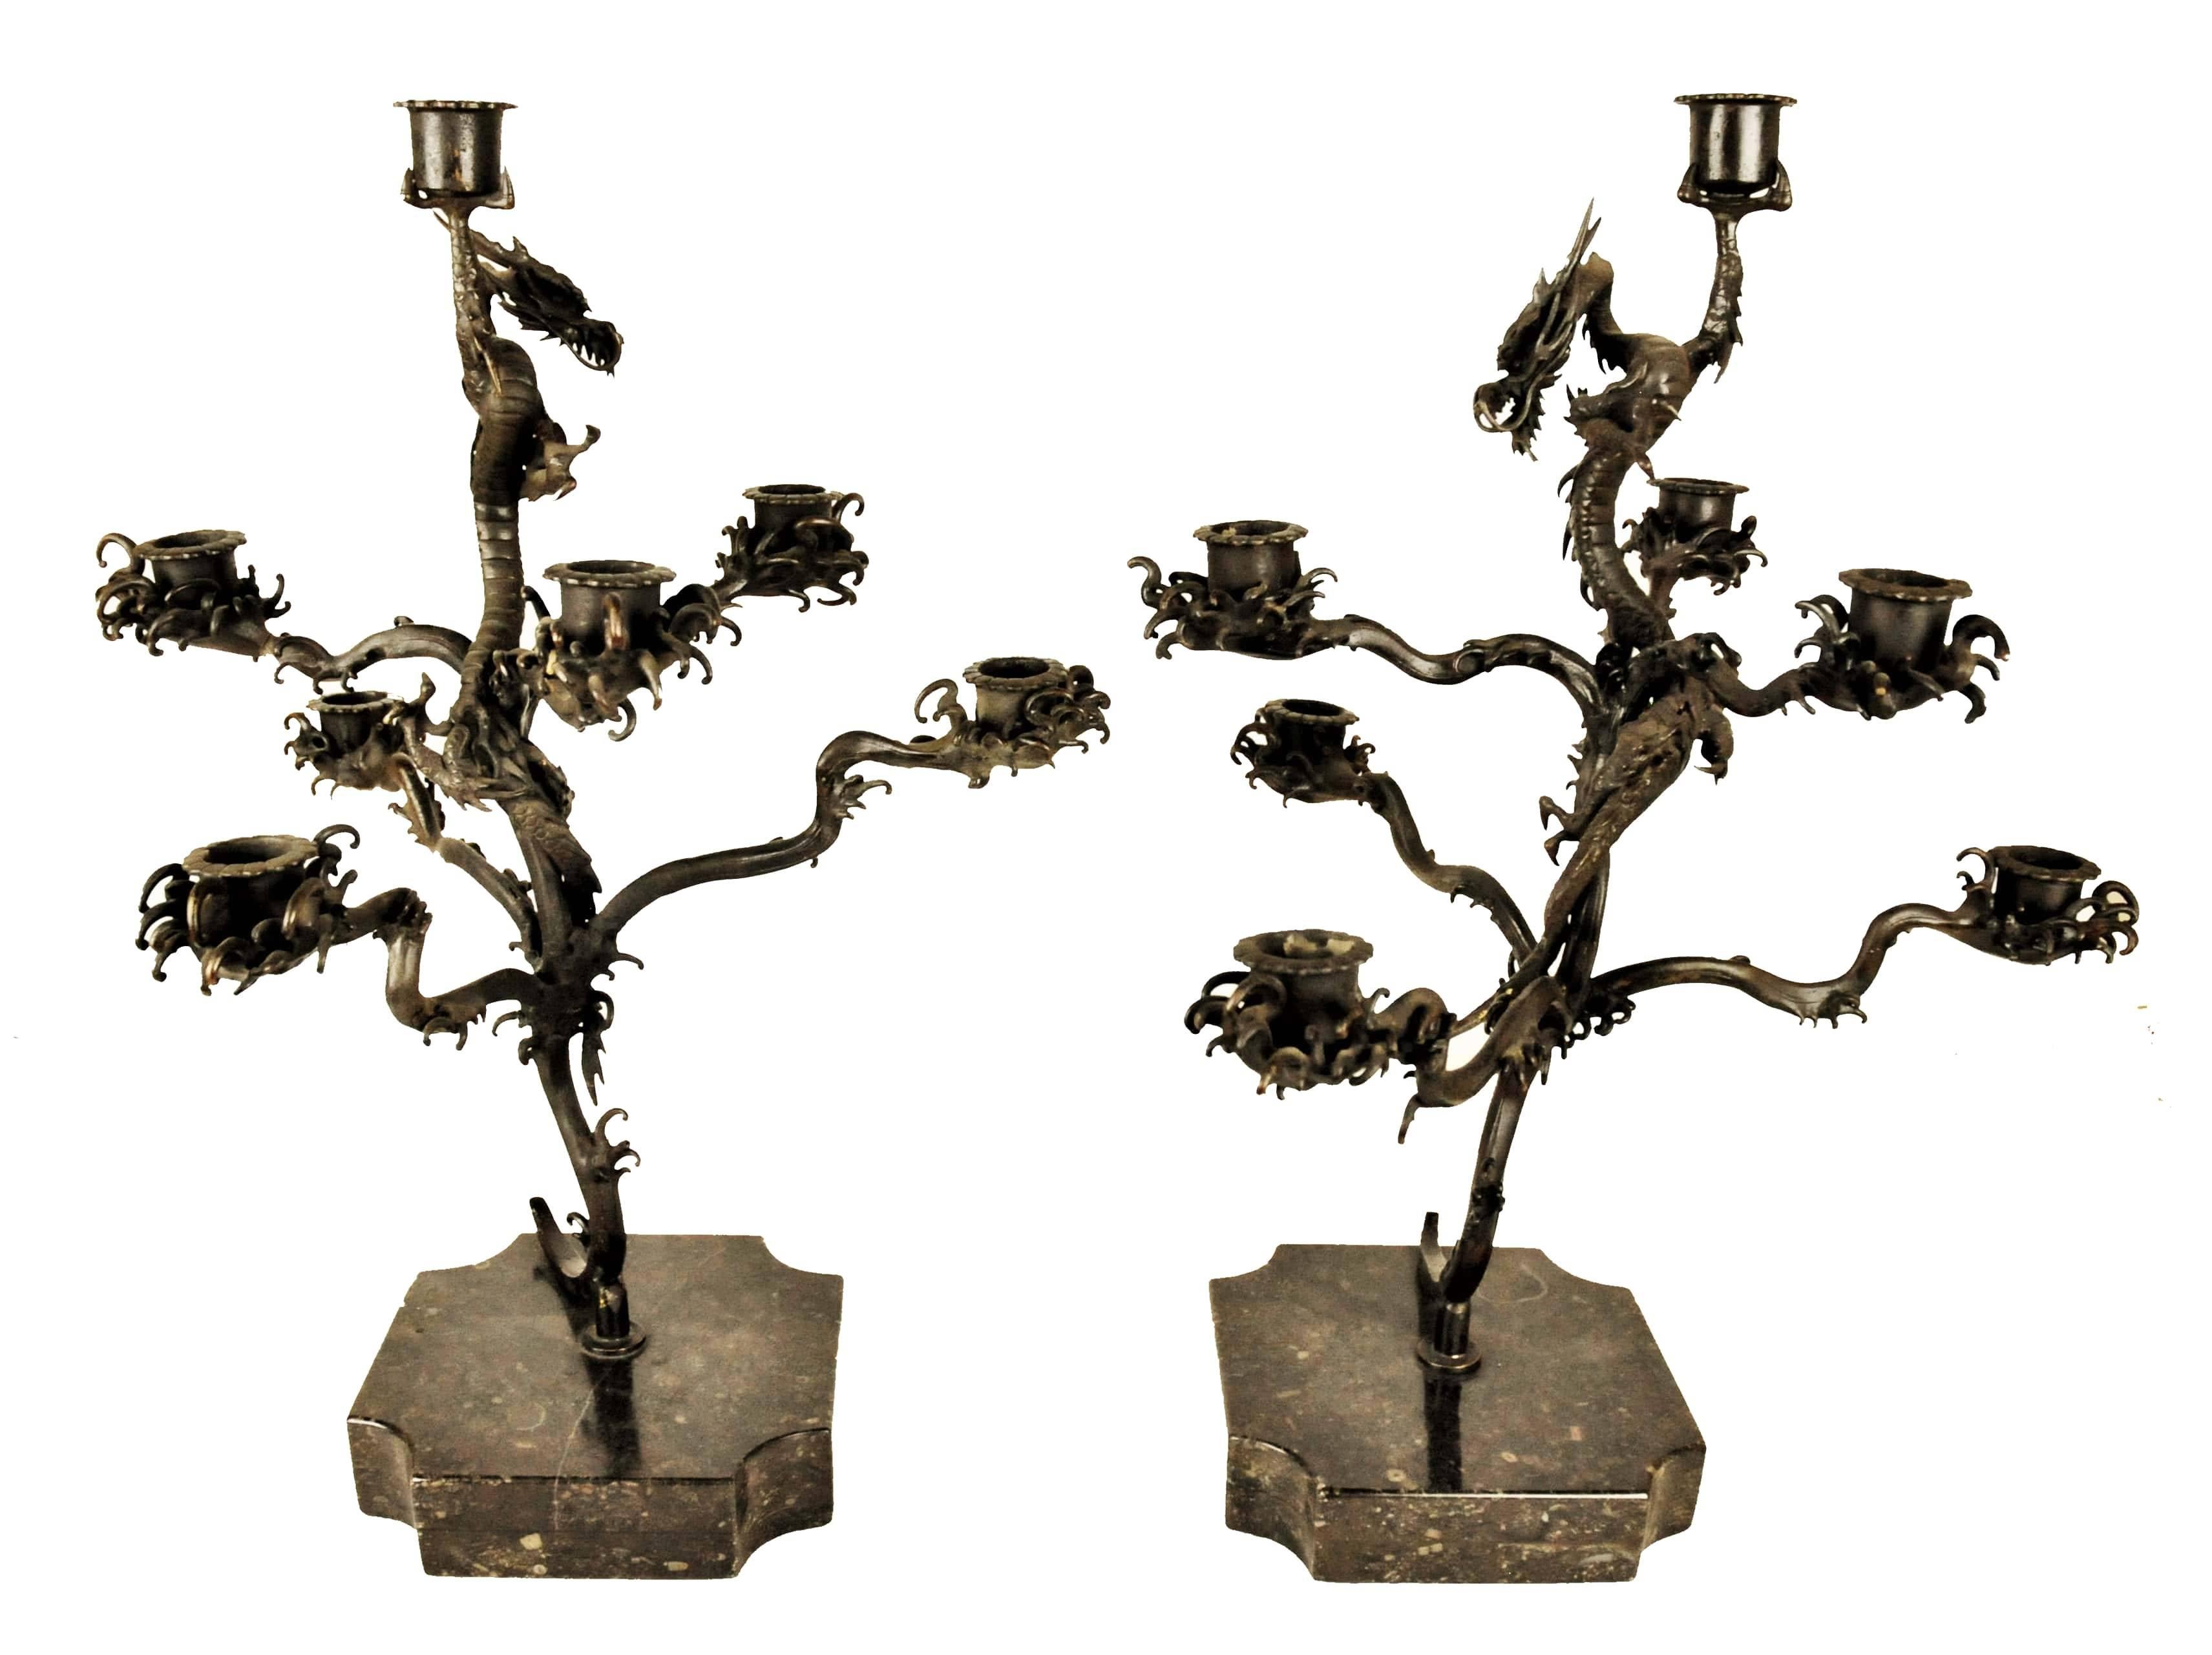 Pair of Japanese Patinated Bronze Candelabras, Meiji Period, ca. 1900 For Sale 4